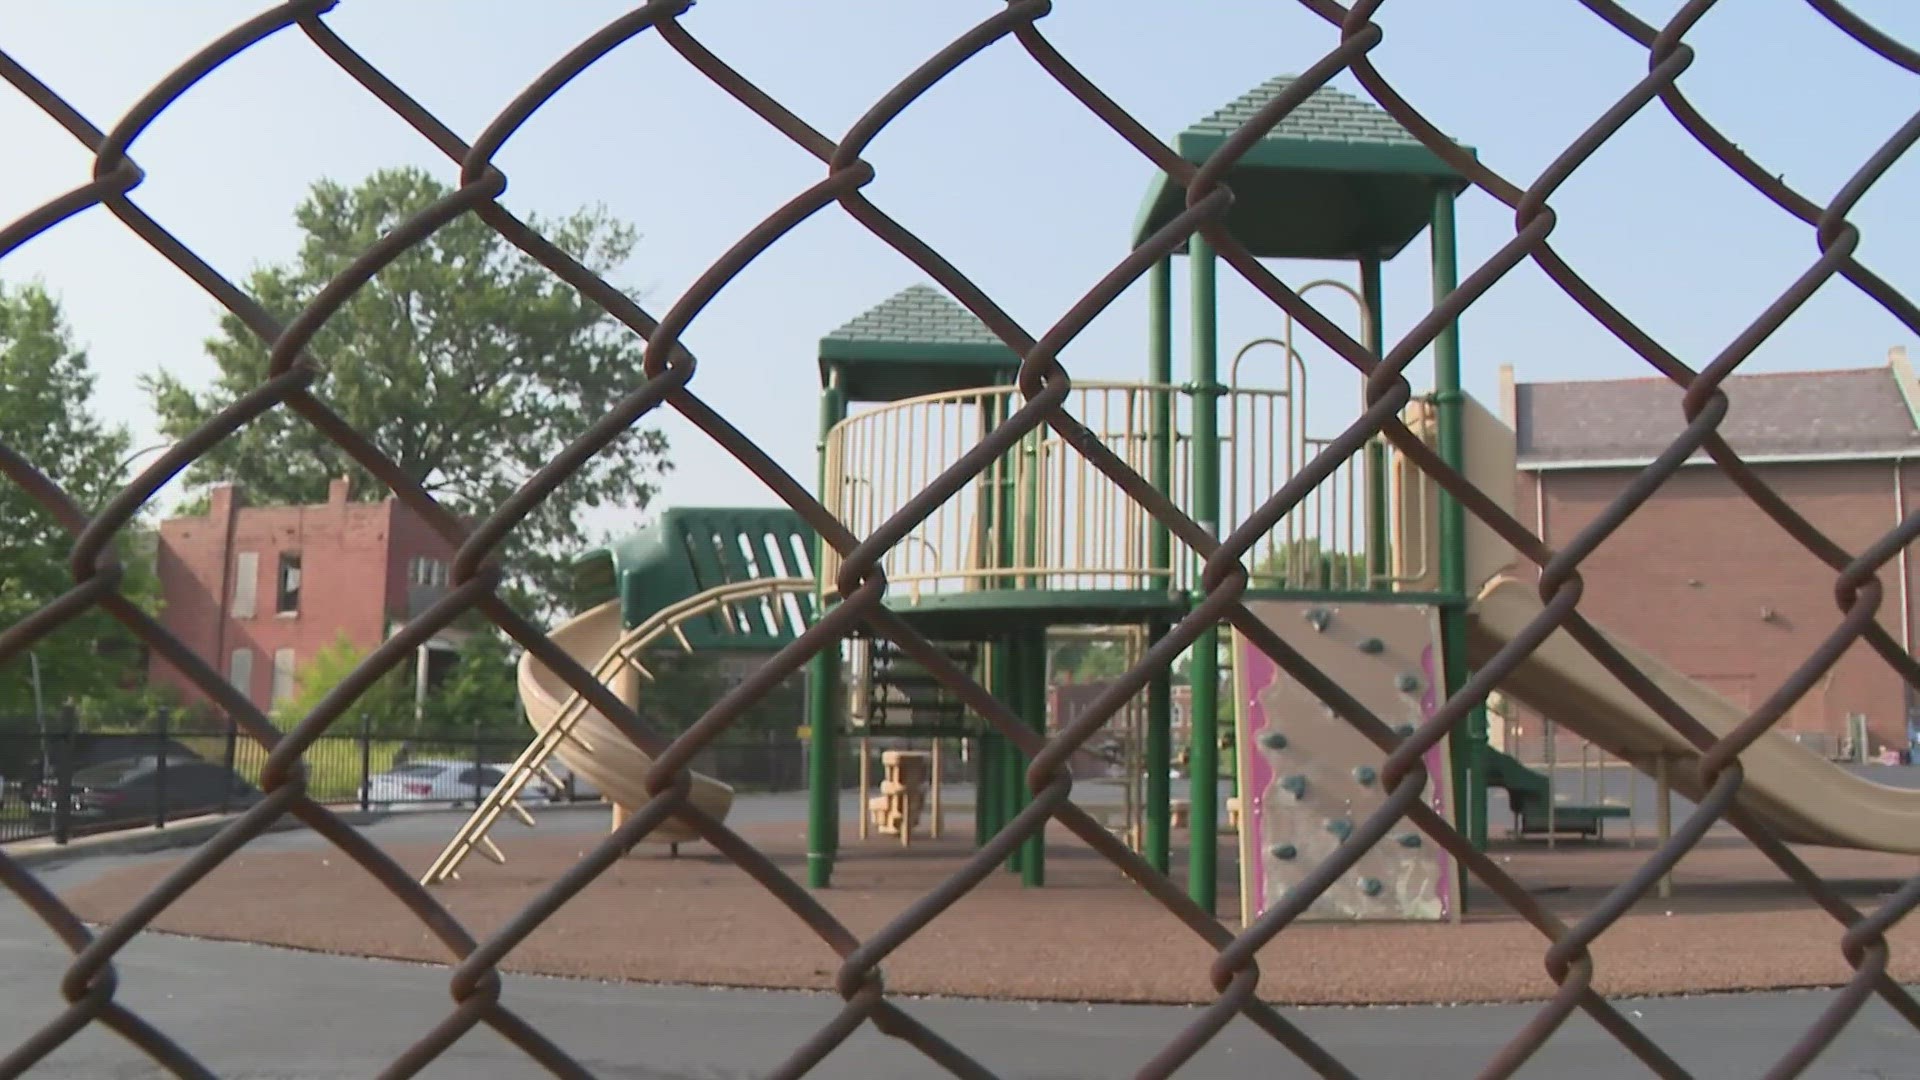 More than six miles of chain link fencing around the schools will be removed due to lead contamination. 5 On Your Side first reported the problem two years ago.